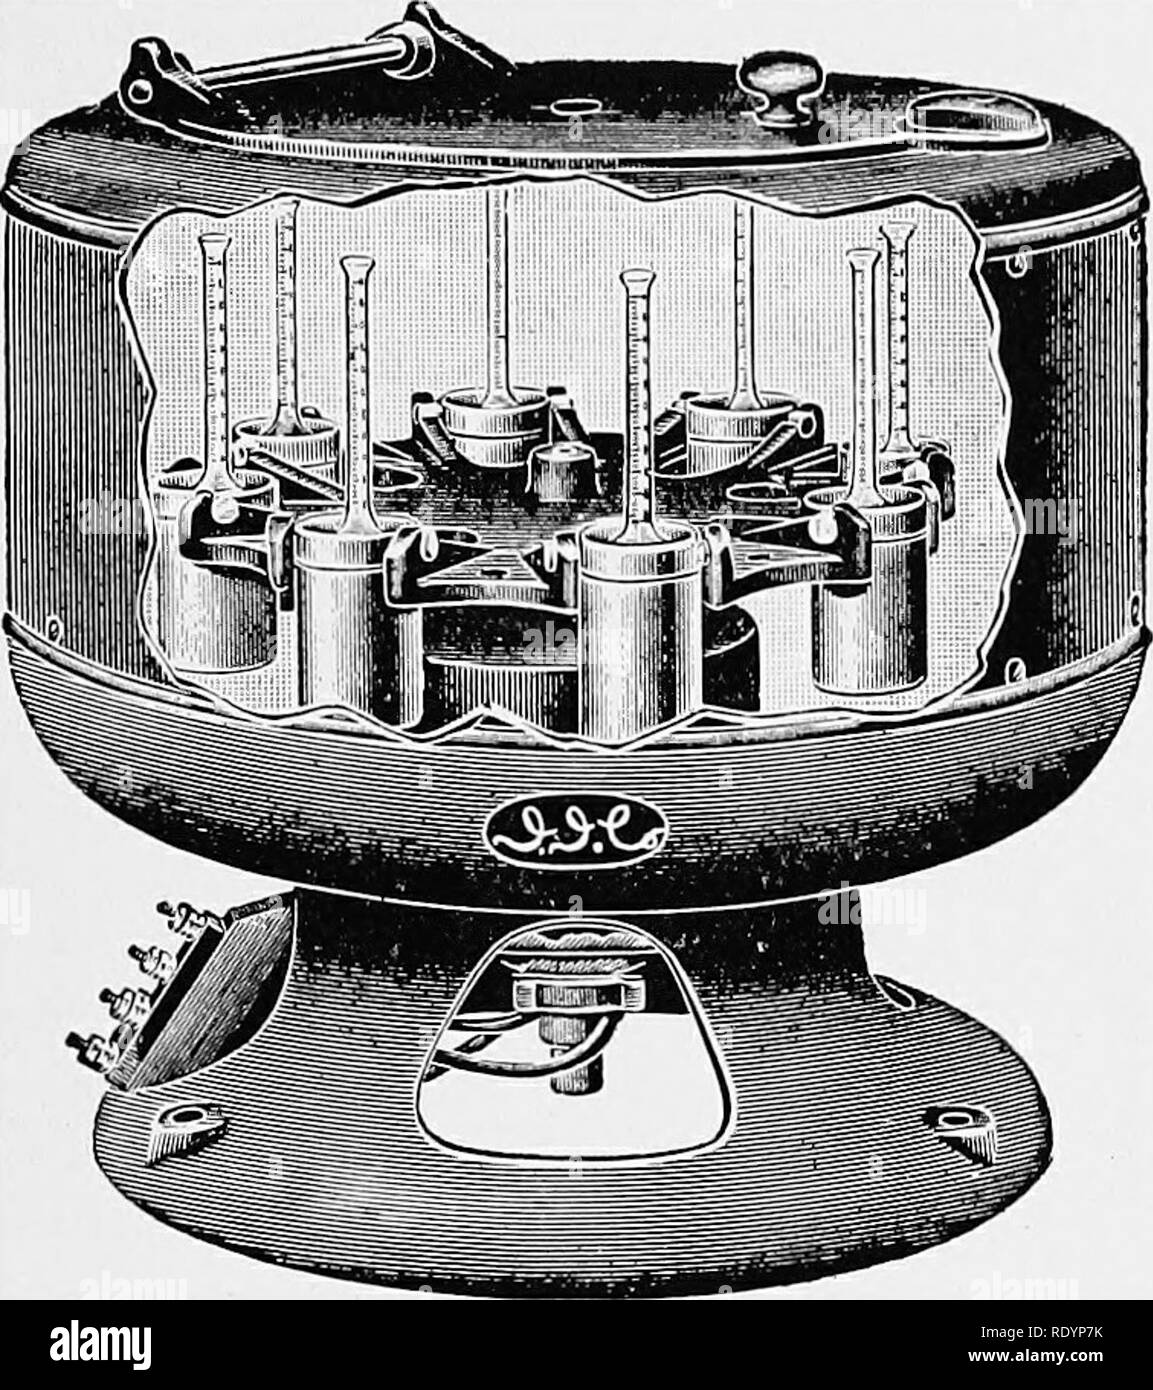 . Milk. Milk. PHYSICAL AND CHEMICAL EXAMINATION OF MILK 163 the wheel. The smaller the diameter, the greater should be the number of revolutions per minute. The following figures give the. Fig. 56.â^Electric centrifuge for the Babcock test. (A. H. Thomas Co.) required number of revolutions per minute for centrifuges of differ- ent diameter (Farrington and Woll): Diameter of wheel. Number of revolutions required. 10 inches 1074 12 'â 980 14 &quot; 909 16 &quot; 848 18 &quot; 800 20 &quot; 759 22 &quot; 724 24 &quot; 693 When a hand centrifuge is used the speed can be judged by counting the numb Stock Photo